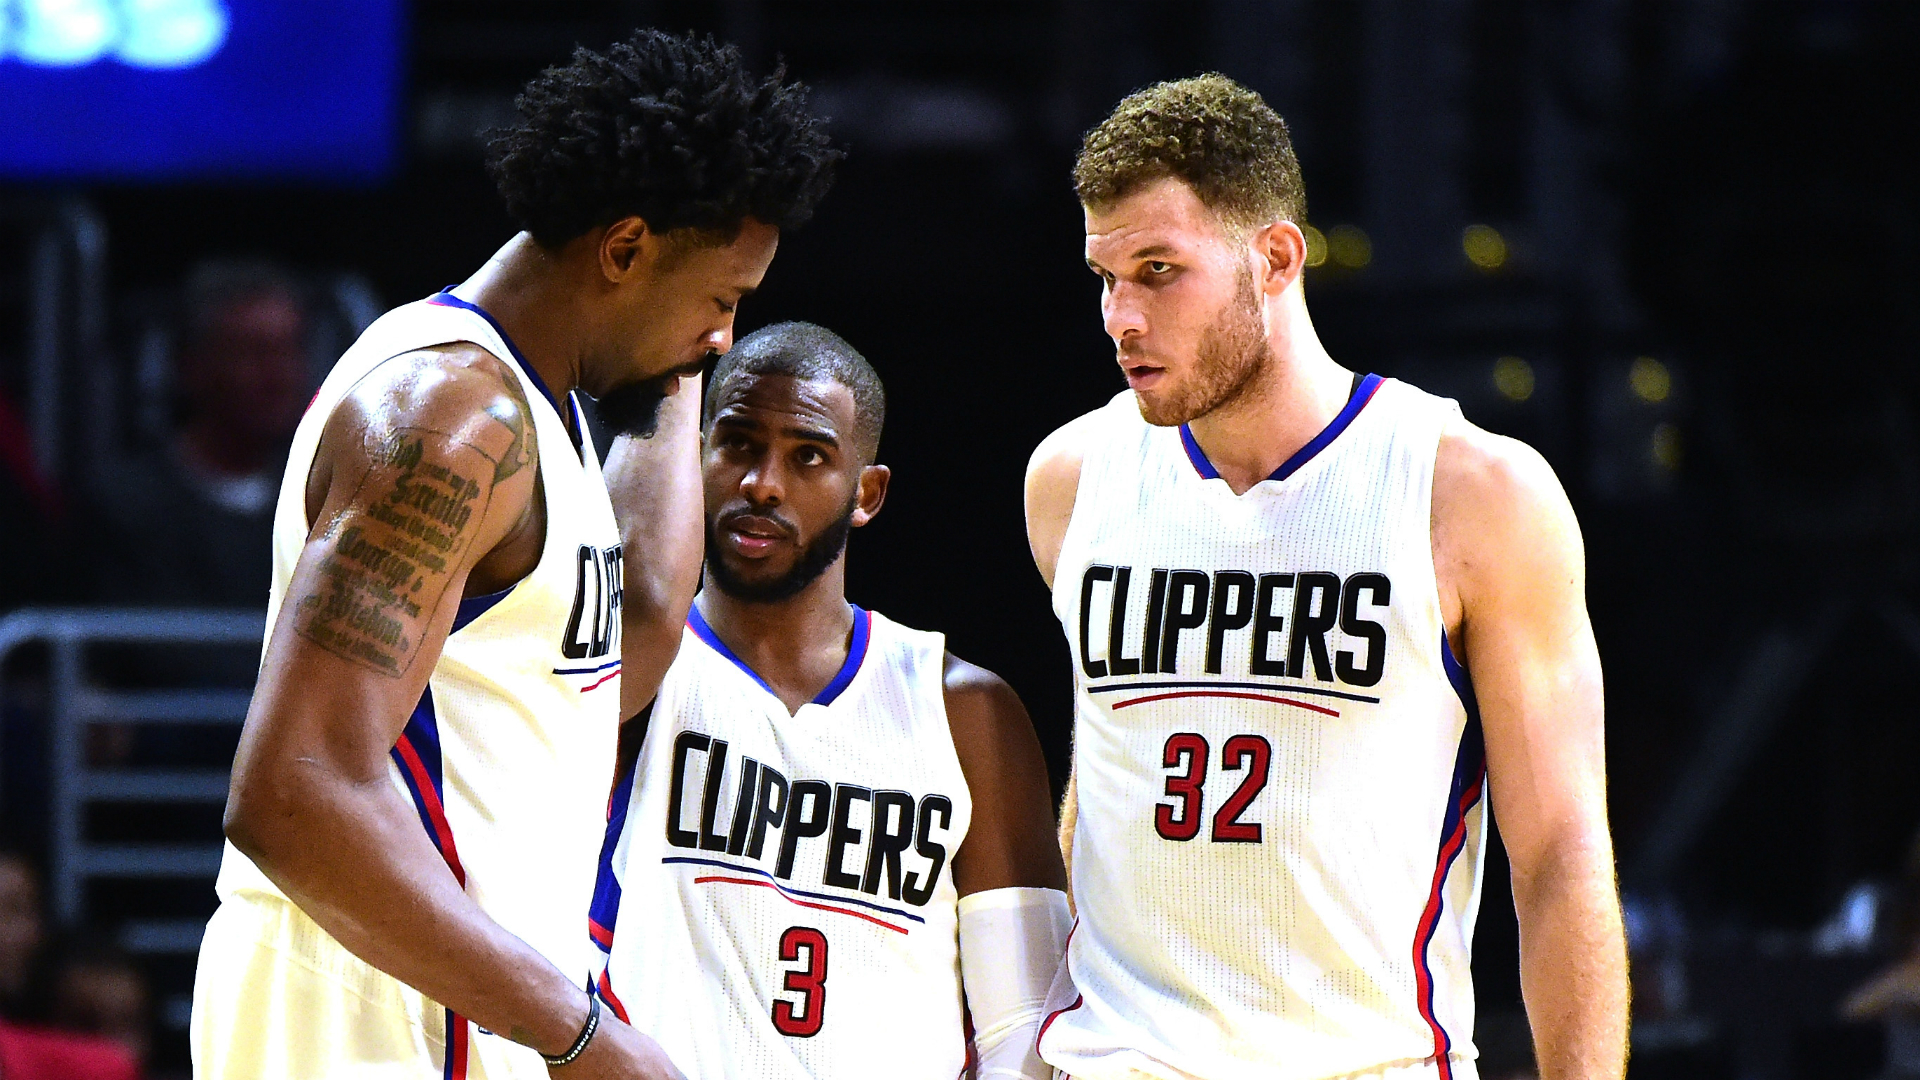 Clippers probably can't afford to get any better than they are now | NBA | Sporting News1920 x 1080